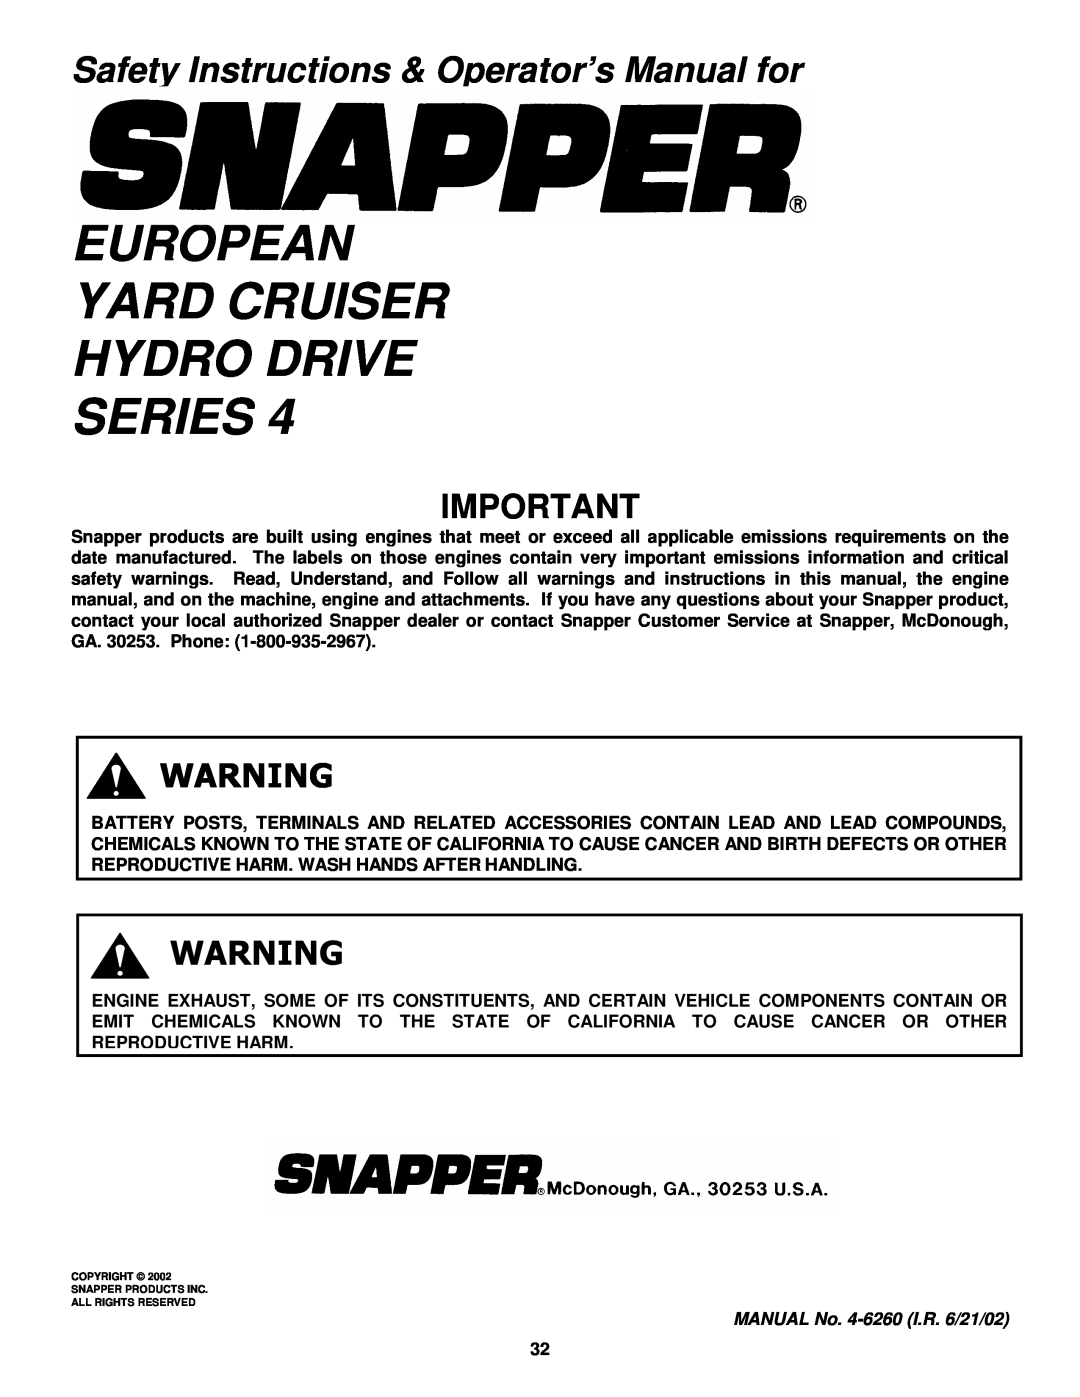 Snapper EYZ15334BVE European Yard Cruiser Hydro Drive Series, Safety Instructions & Operator’s Manual for 